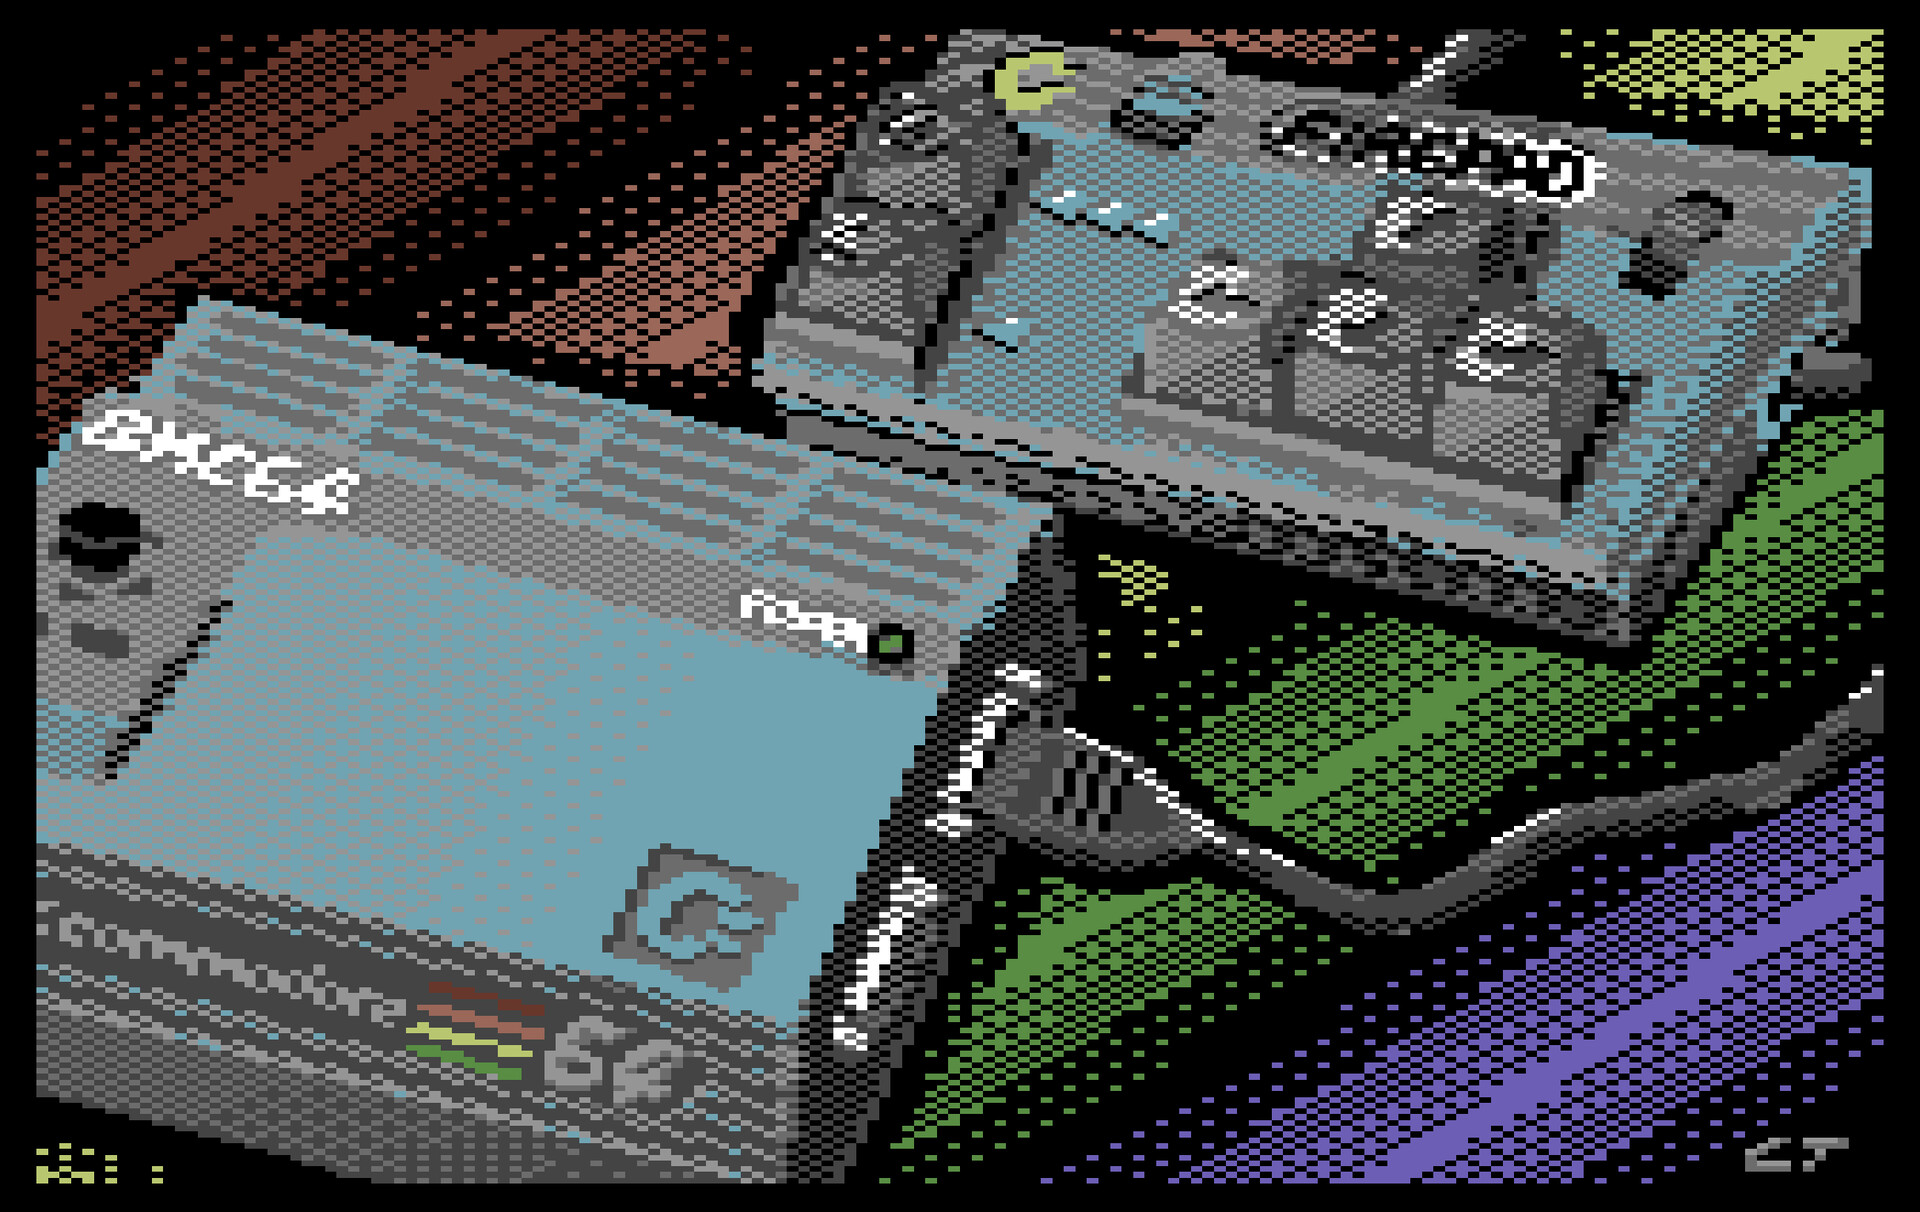 ArtStation - Creating Pixel Art with Commodore 64 Limitations